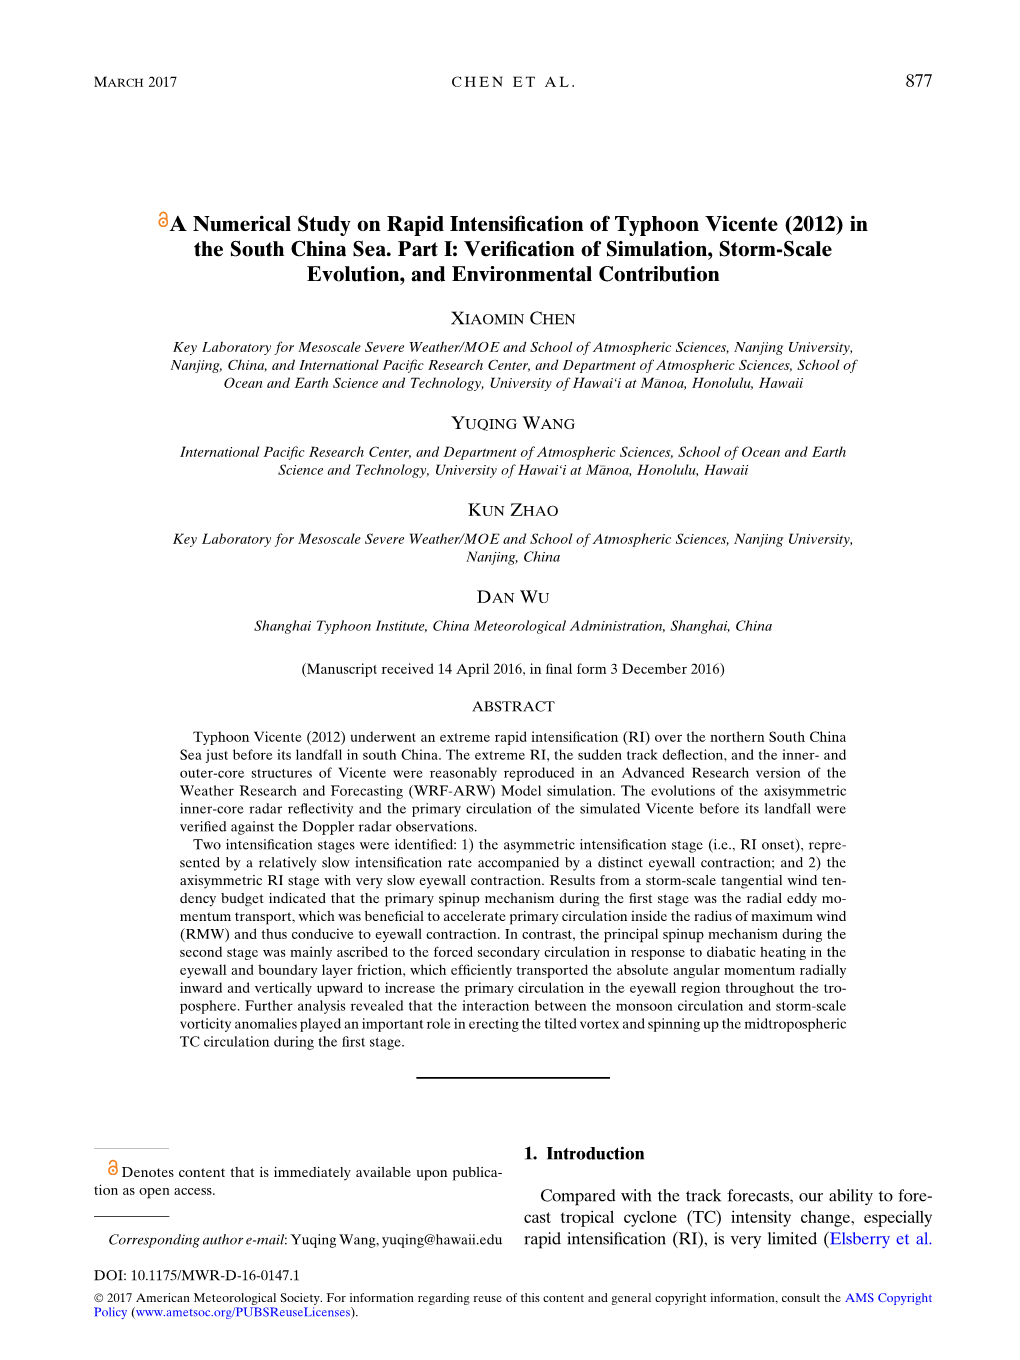 A Numerical Study on Rapid Intensification of Typhoon Vicente